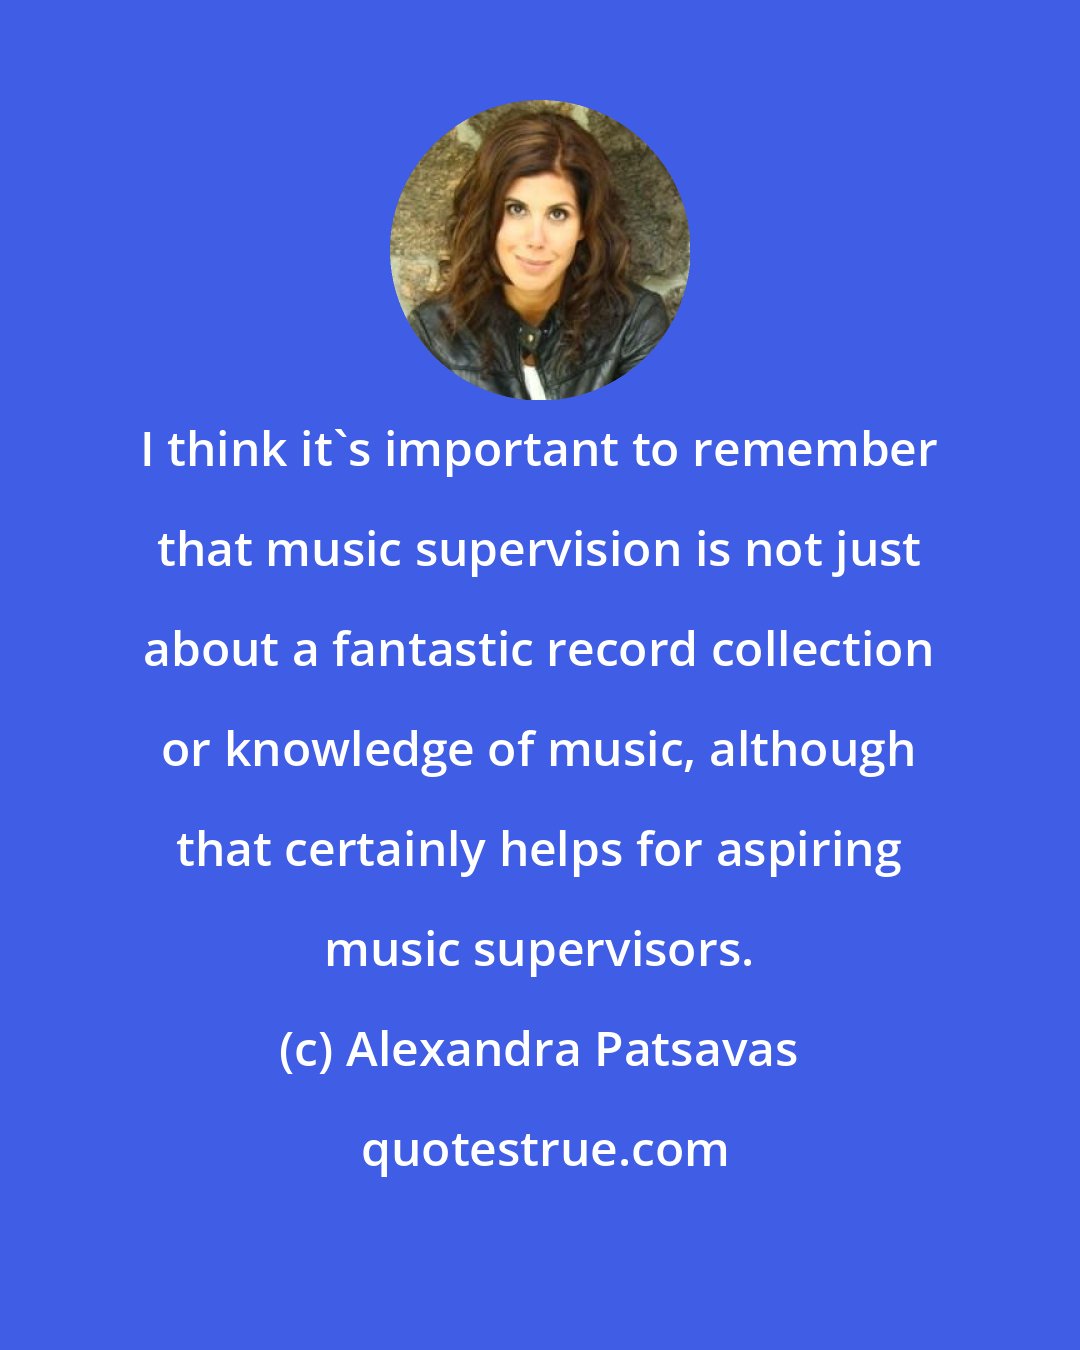 Alexandra Patsavas: I think it's important to remember that music supervision is not just about a fantastic record collection or knowledge of music, although that certainly helps for aspiring music supervisors.